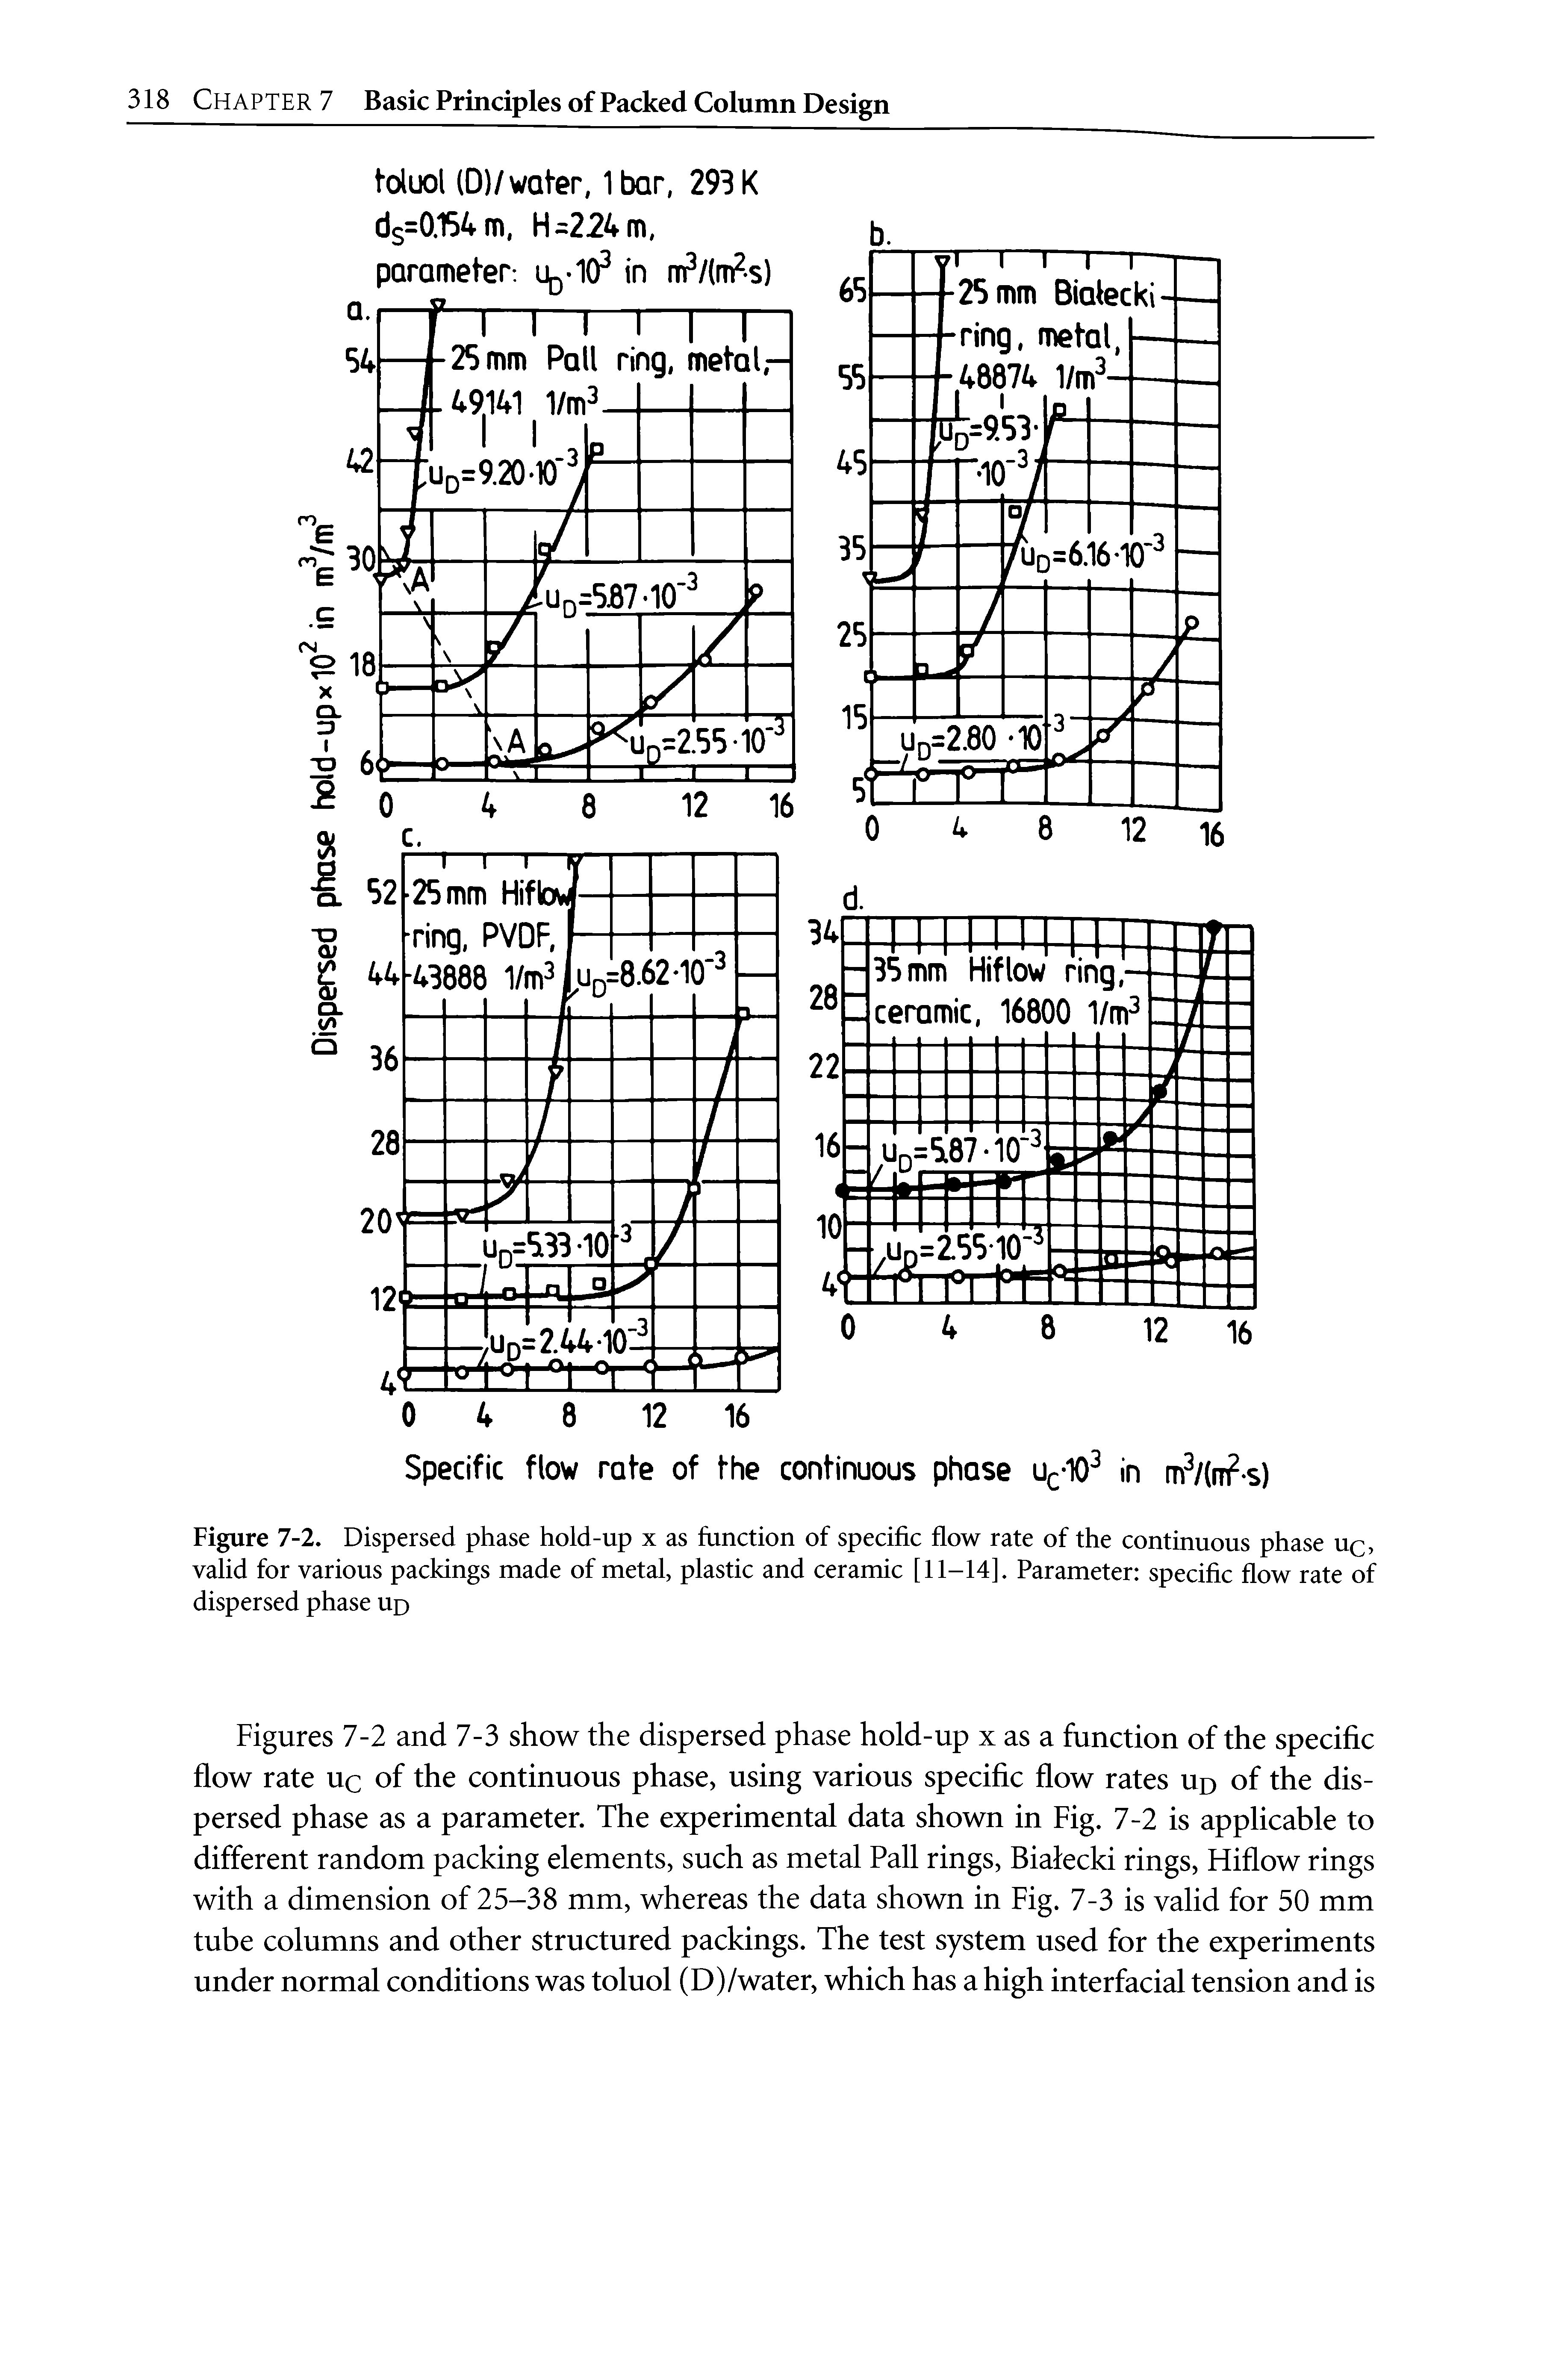 Figure 7-2. Dispersed phase hold-up x as function of specific flow rate of the continuous phase uc> valid for various packings made of metal, plastic and ceramic [11-14]. Parameter specific flow rate of dispersed phase up...